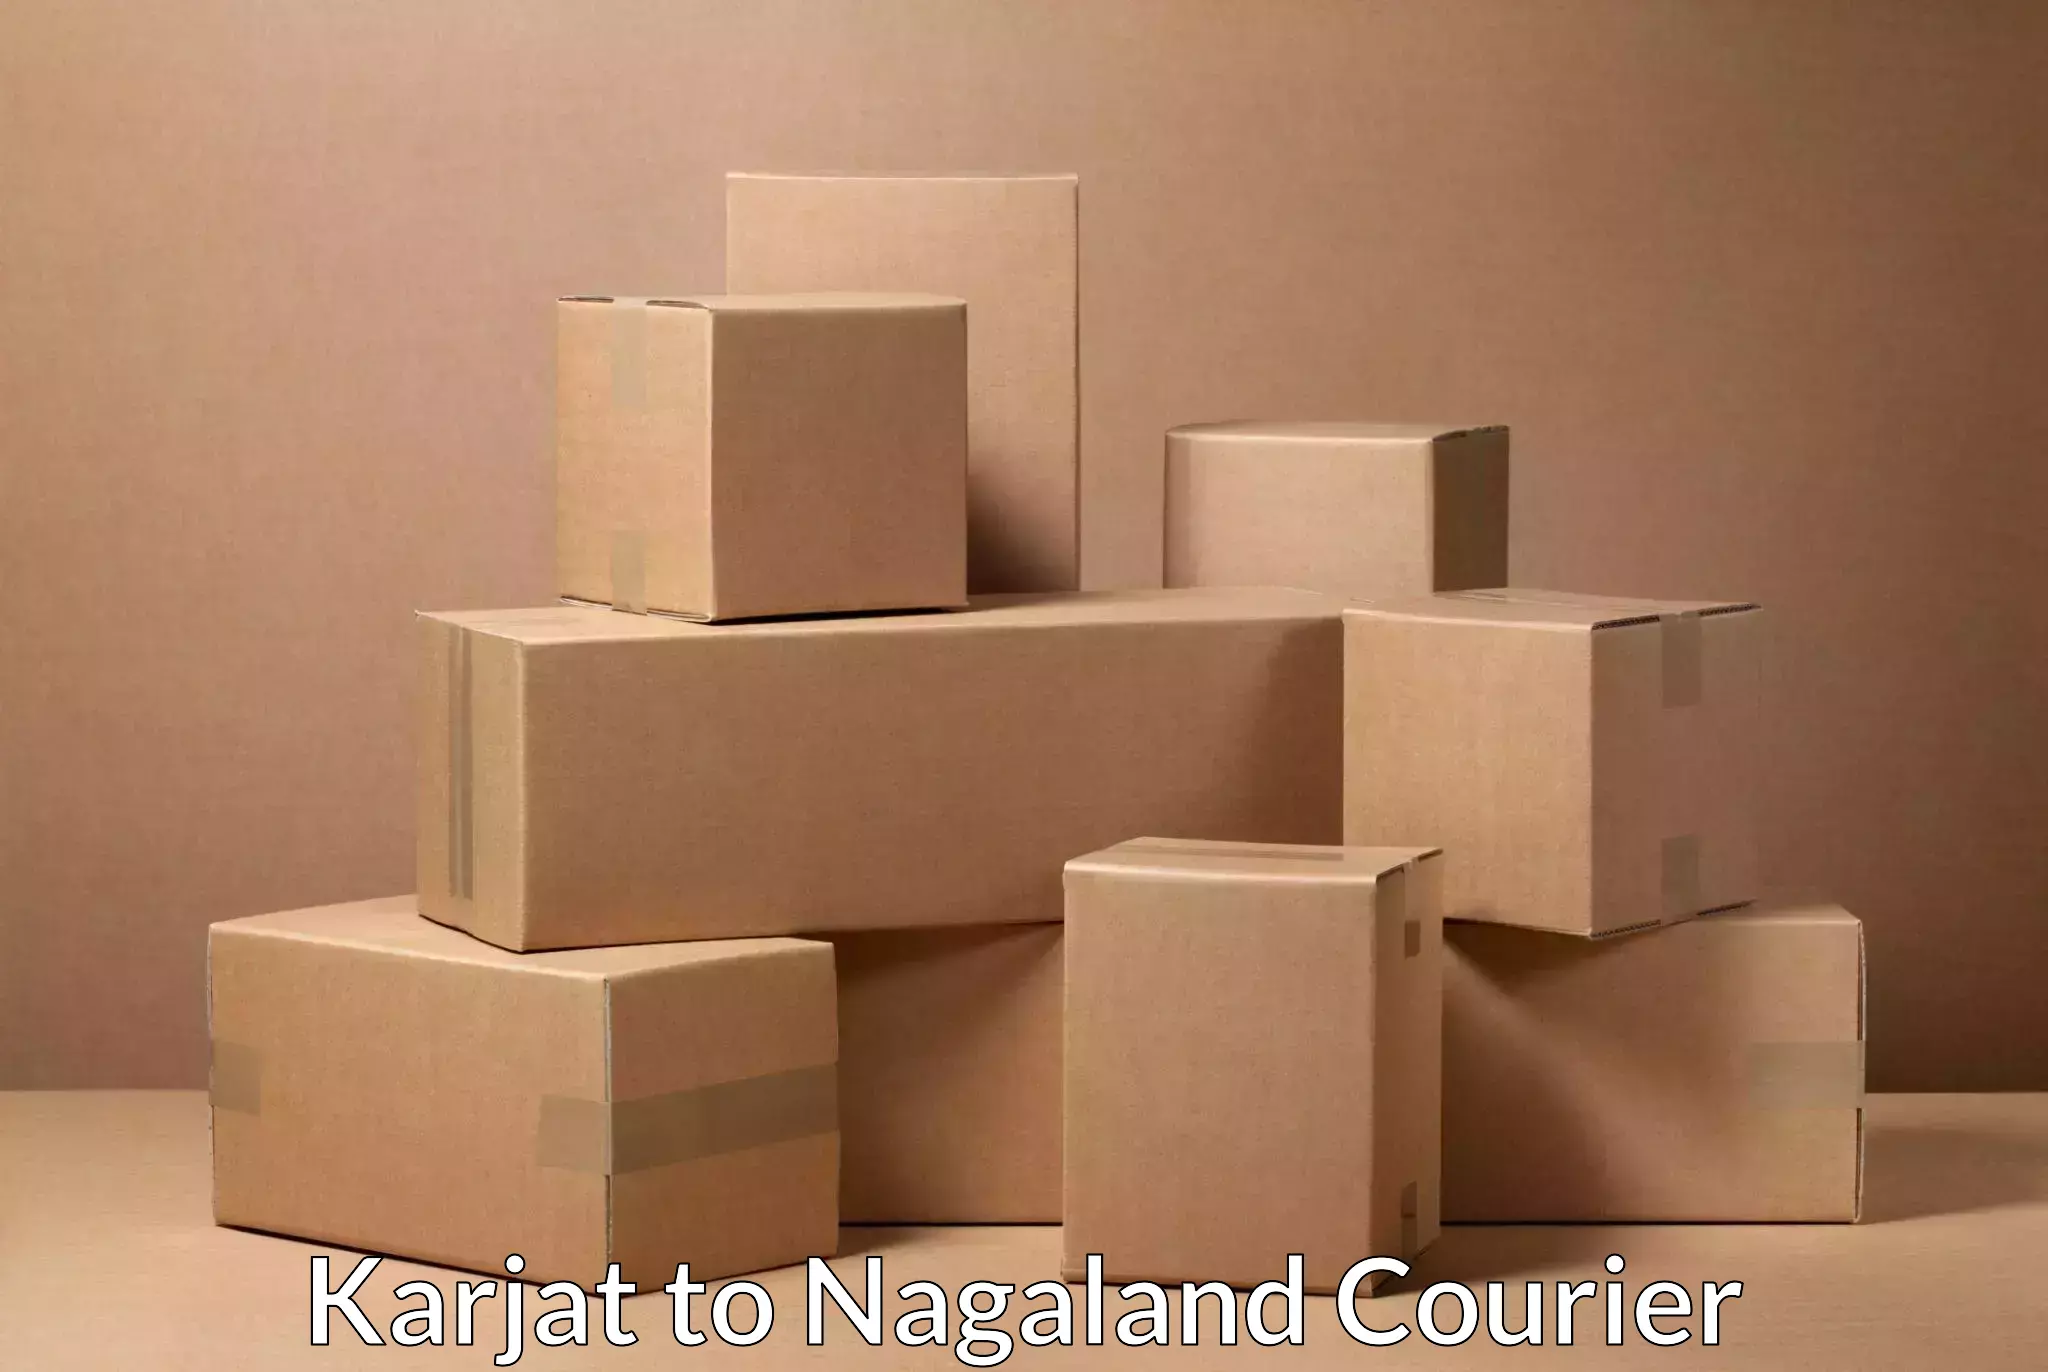 Same-day delivery solutions Karjat to Nagaland